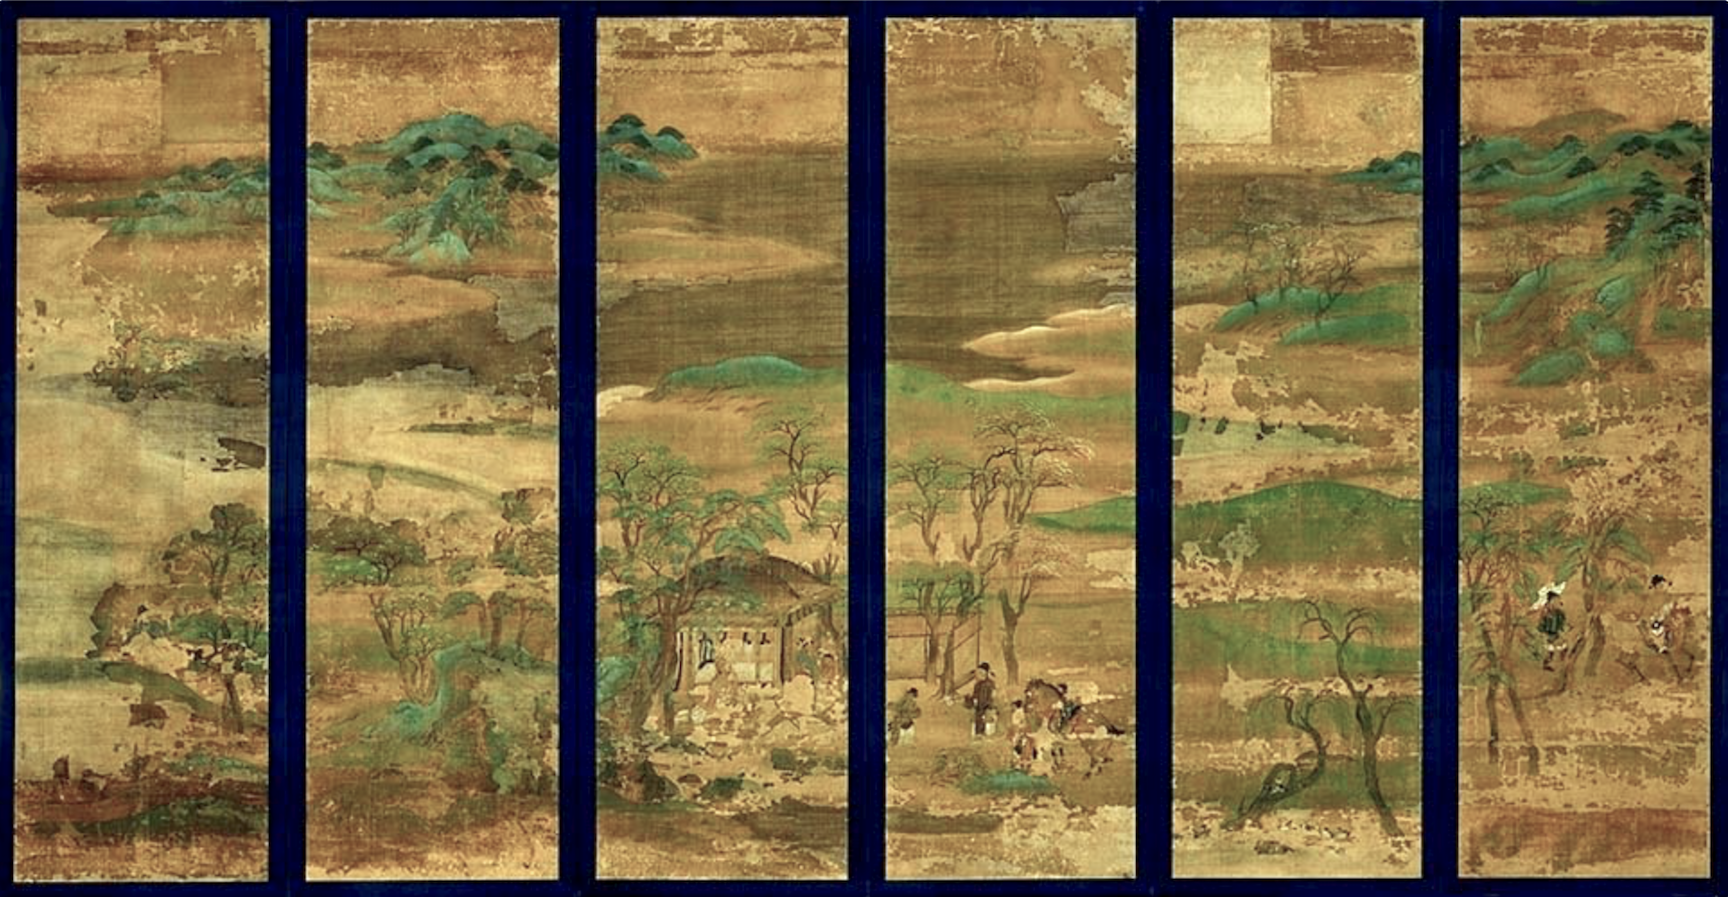 One of the earliest examples of Heian-period yamato-e landscape painting. Senzui byōbu 山水屏風 (lit. “folding screen(s) with (imagery of) mountains and waters). Six-fold screen, 11th century, color on silk, 146.4 x 42.7 cm, designated National Treasure (Kyoto National Museum)